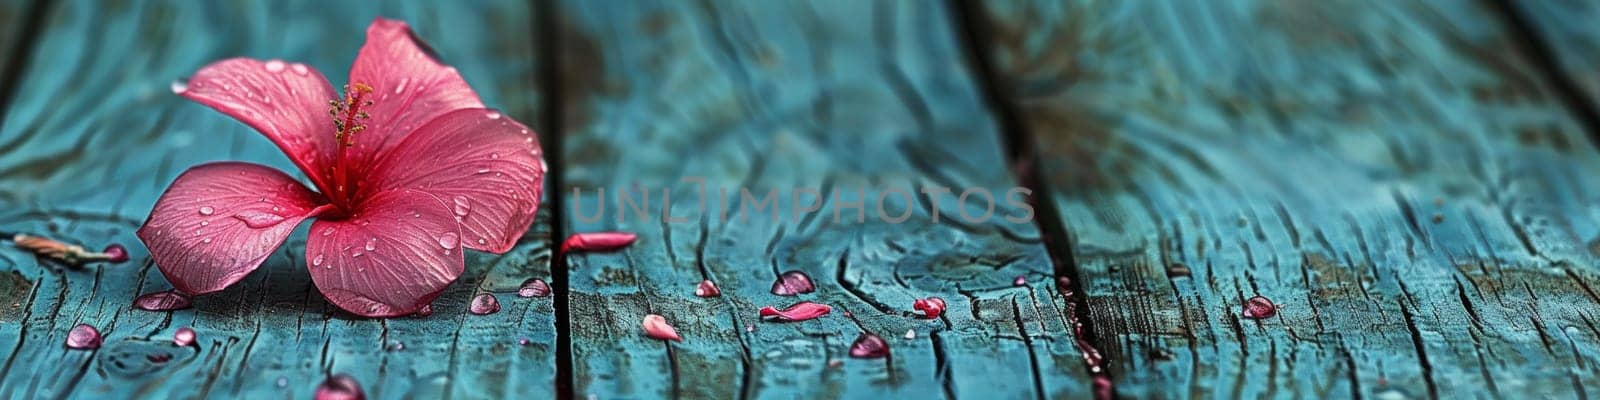 A pink flower sitting on a wooden table with water droplets, AI by starush